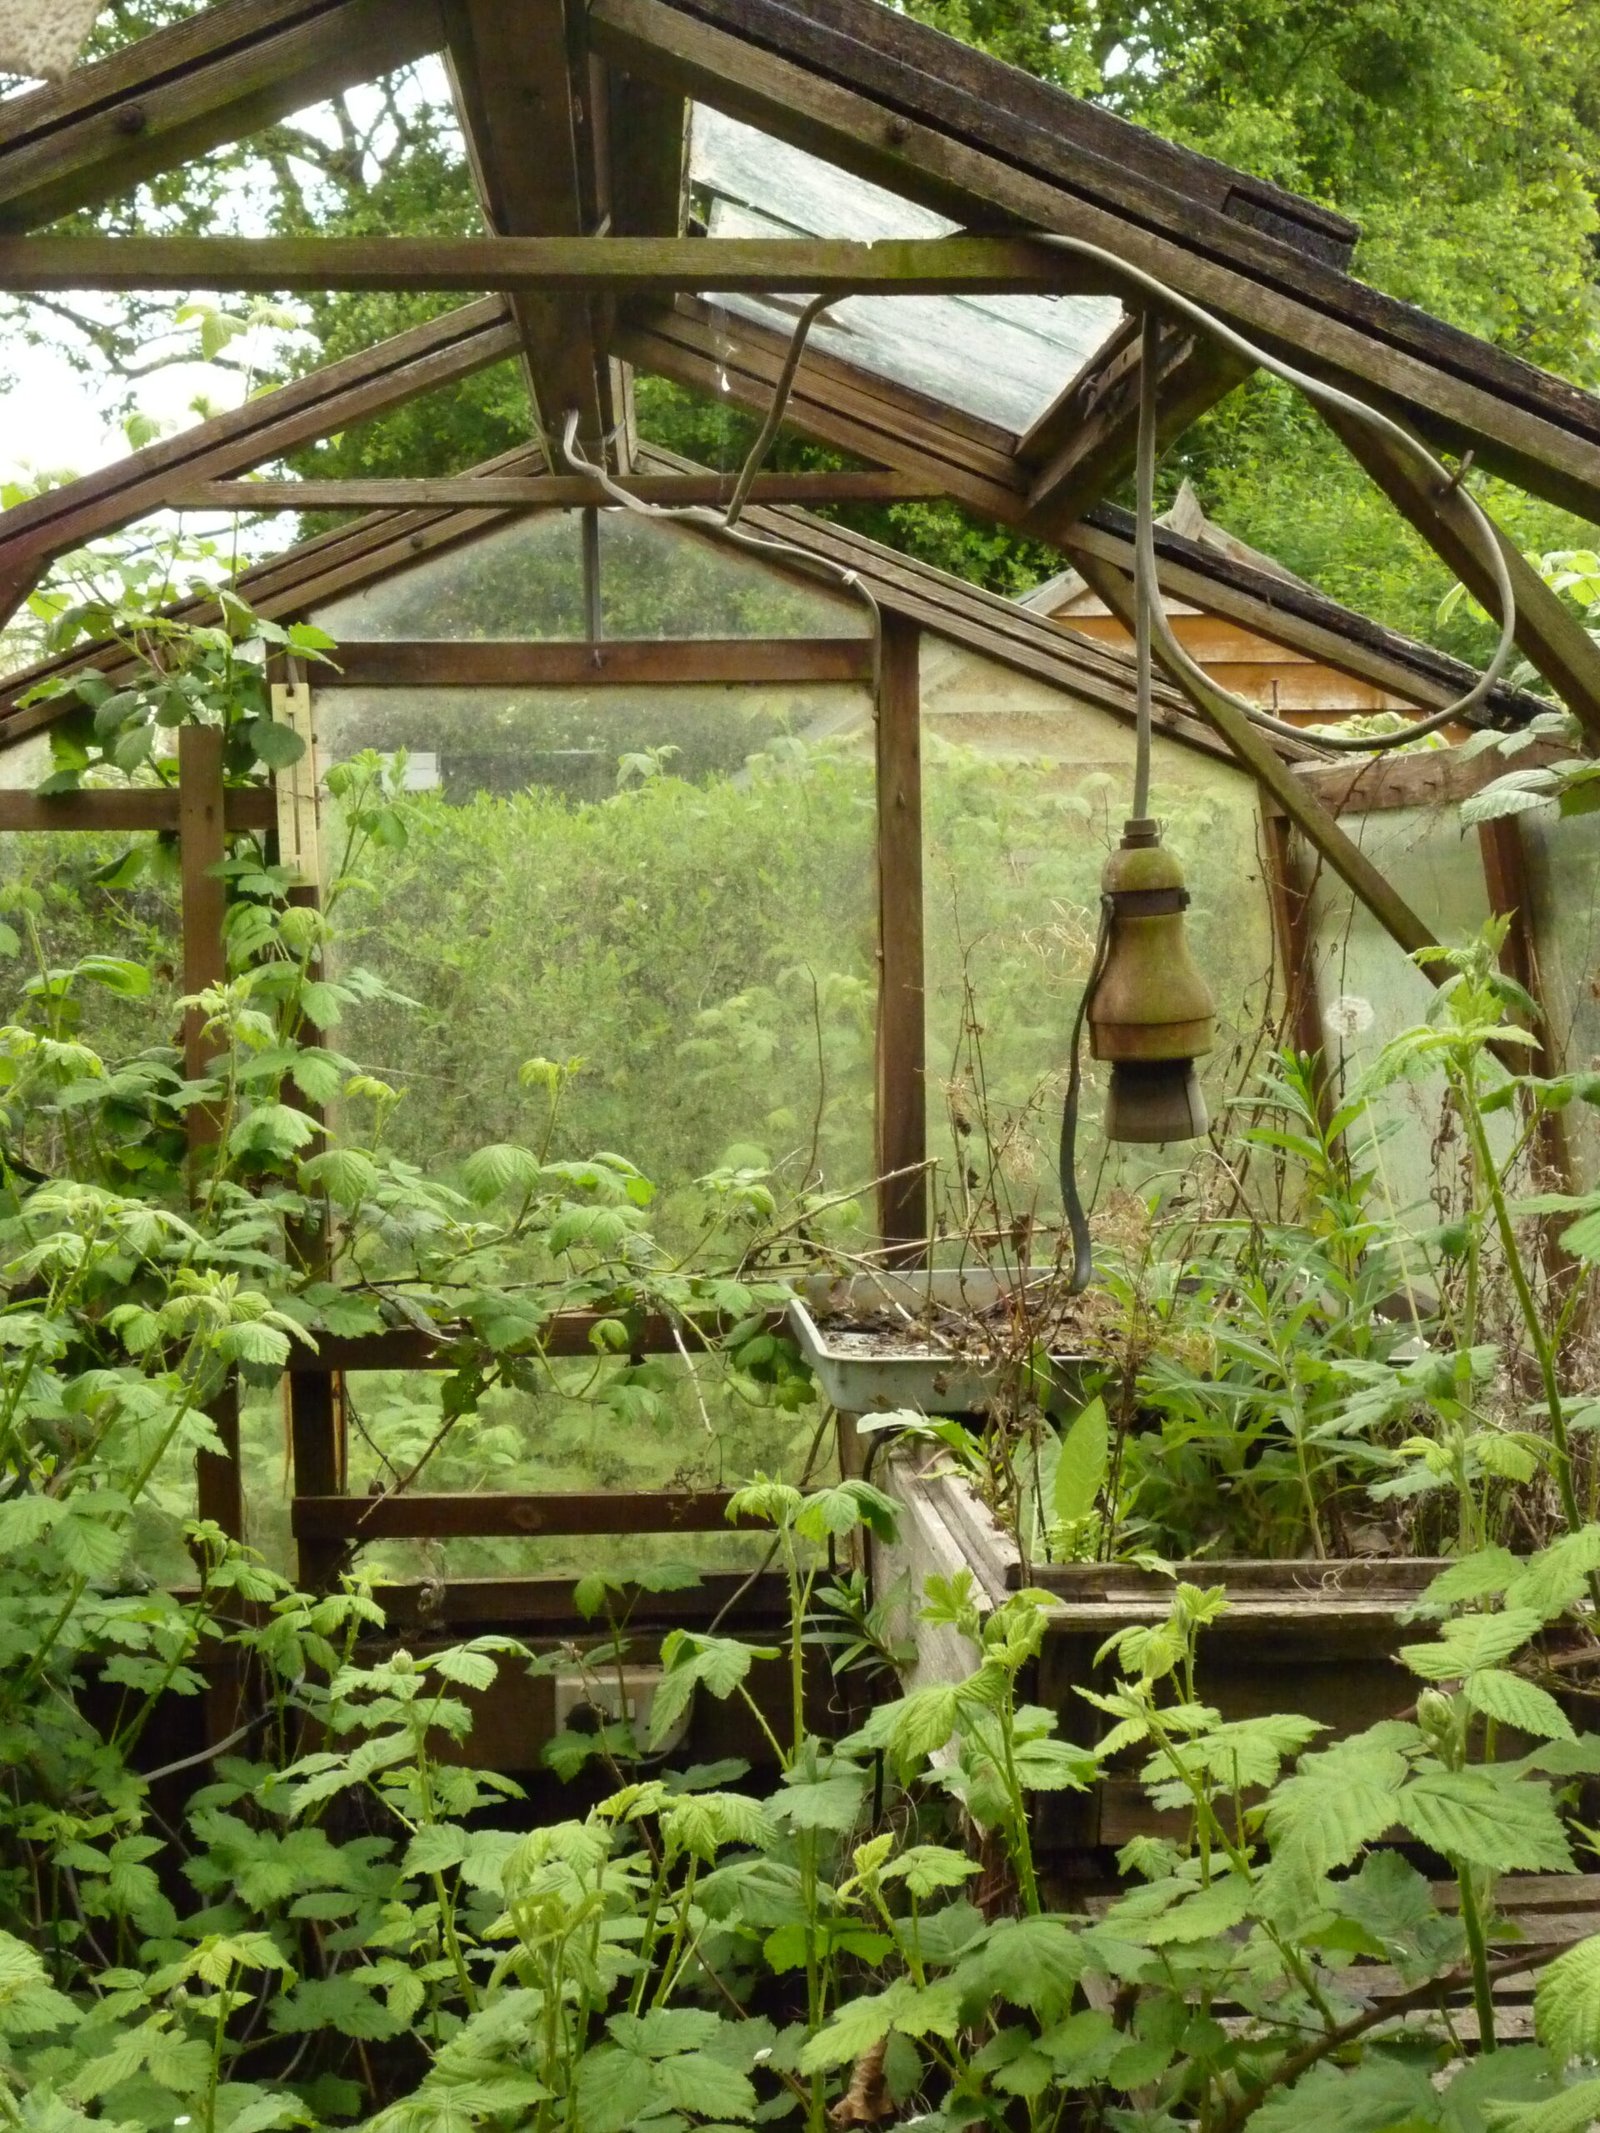 How to Secure Your Greenhouse: Locks and Tips